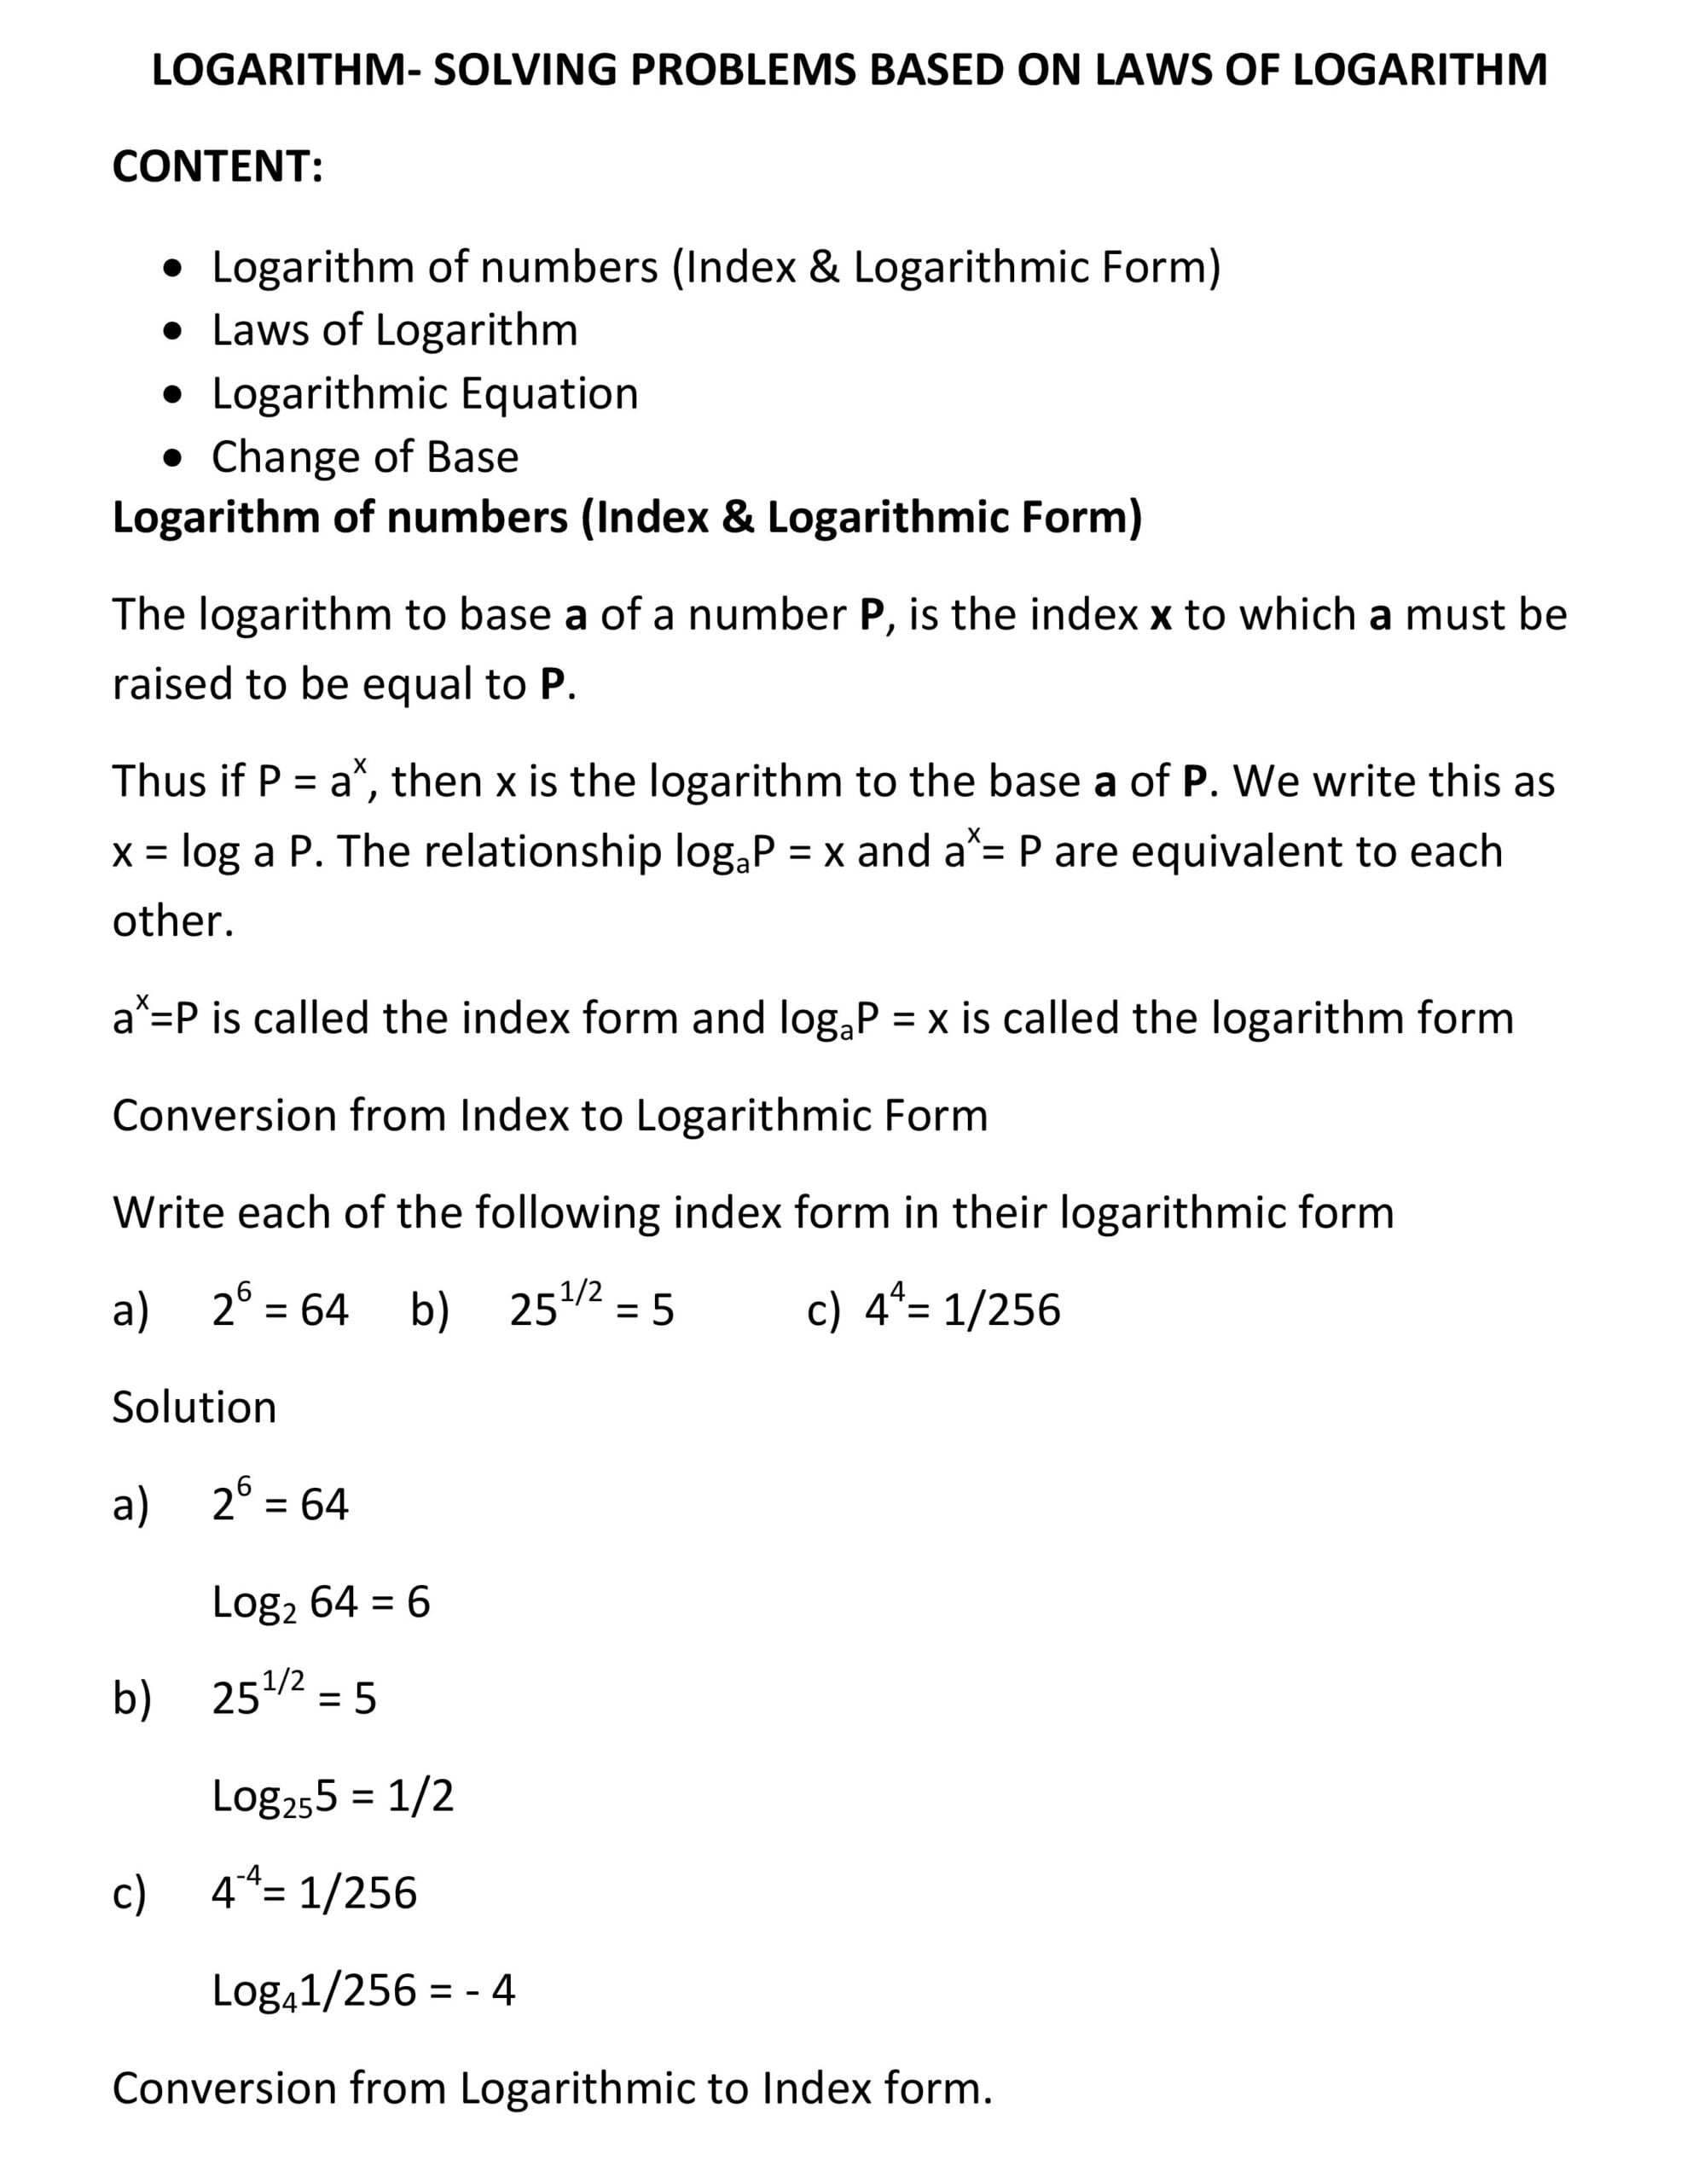 LOGARITHM- SOLVING PROBLEMS BASED ON LAWS OF LOGARITHM_1